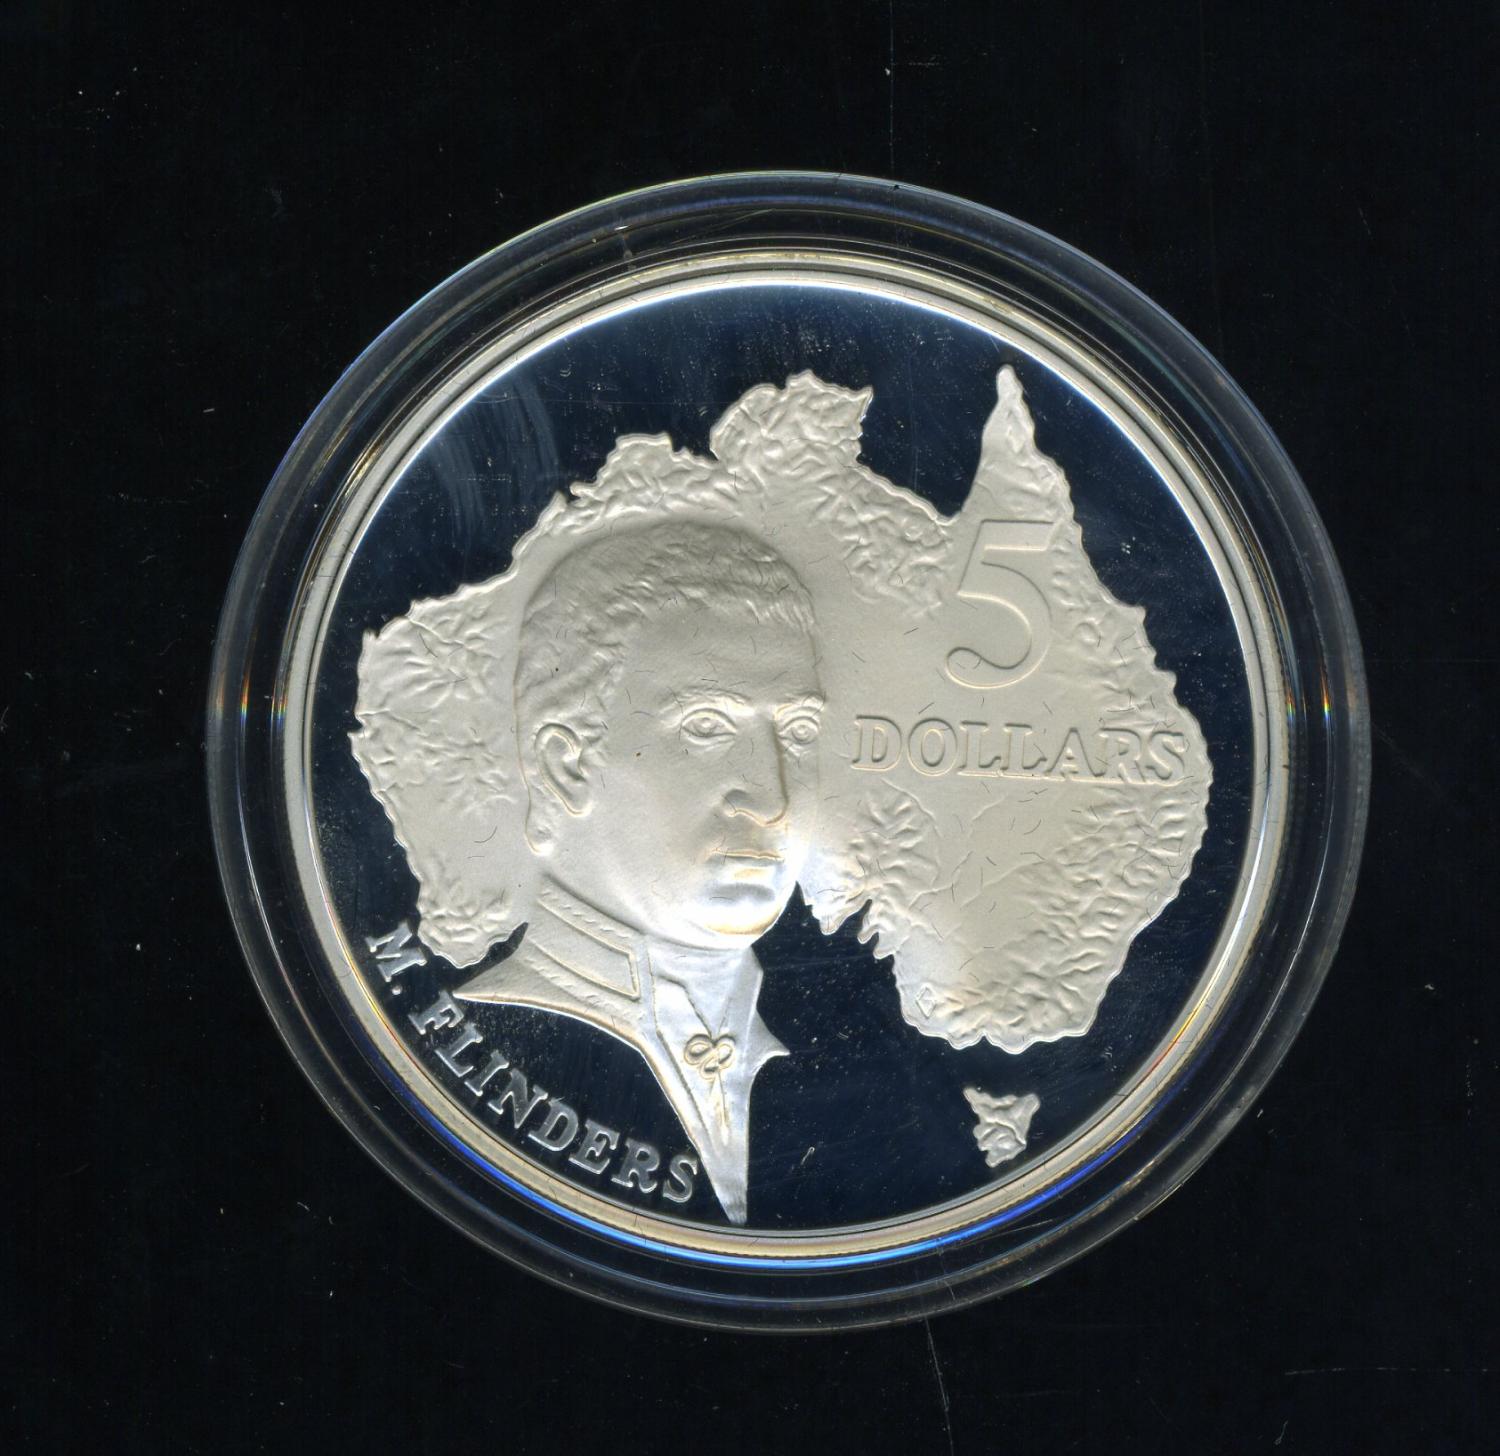 Thumbnail for 1993 Australian $5 Silver Coin from Masterpieces in Silver Set - Matthew Flinders.  The Coin is Sterling Silver and contains over 1oz of Pure Silver.